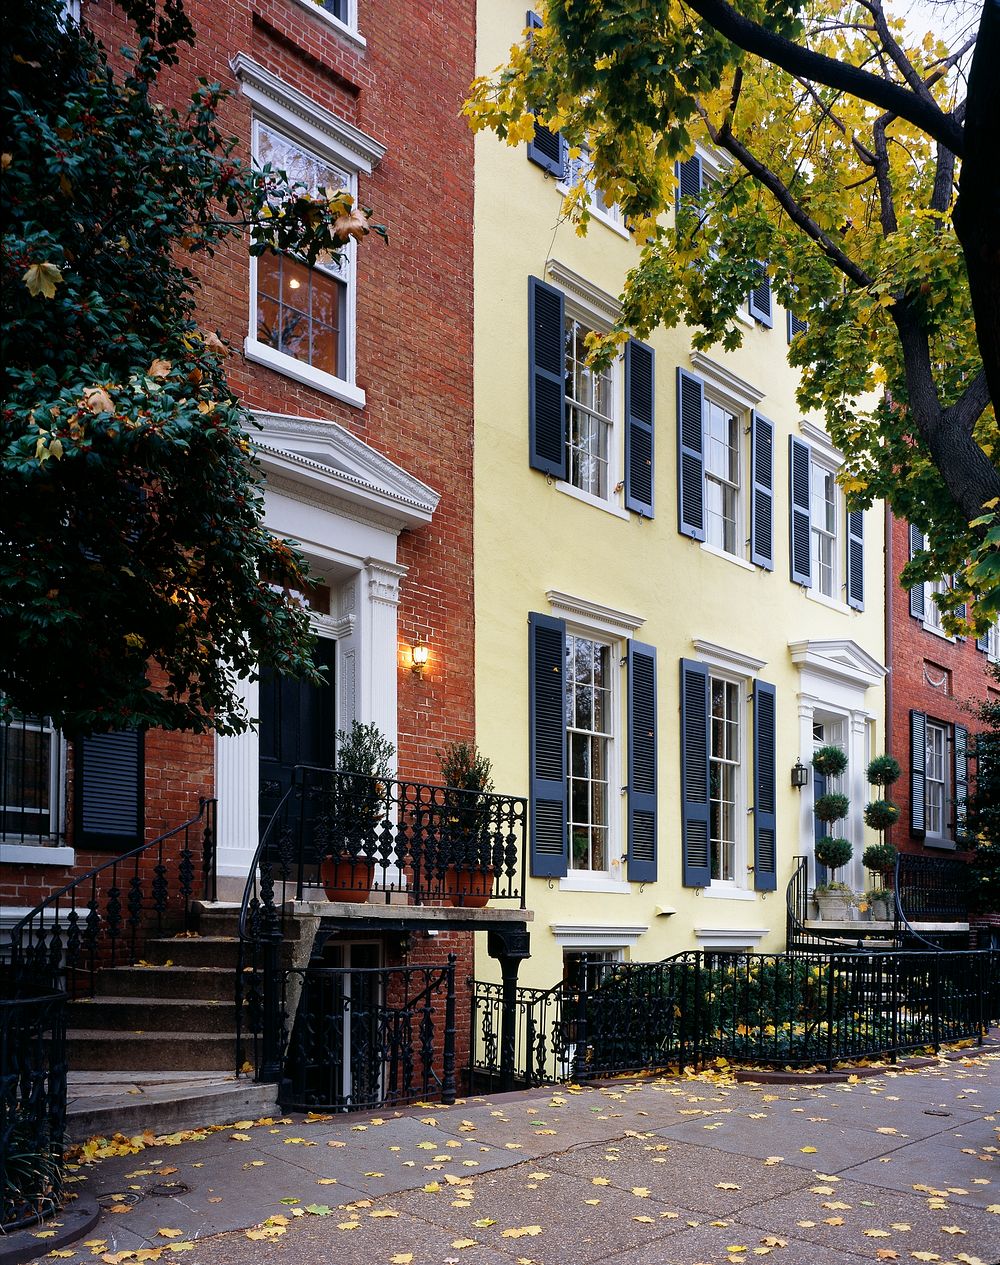 Georgetown Row Houses, Washington, D.C. Original image from Carol M. Highsmith&rsquo;s America, Library of Congress…